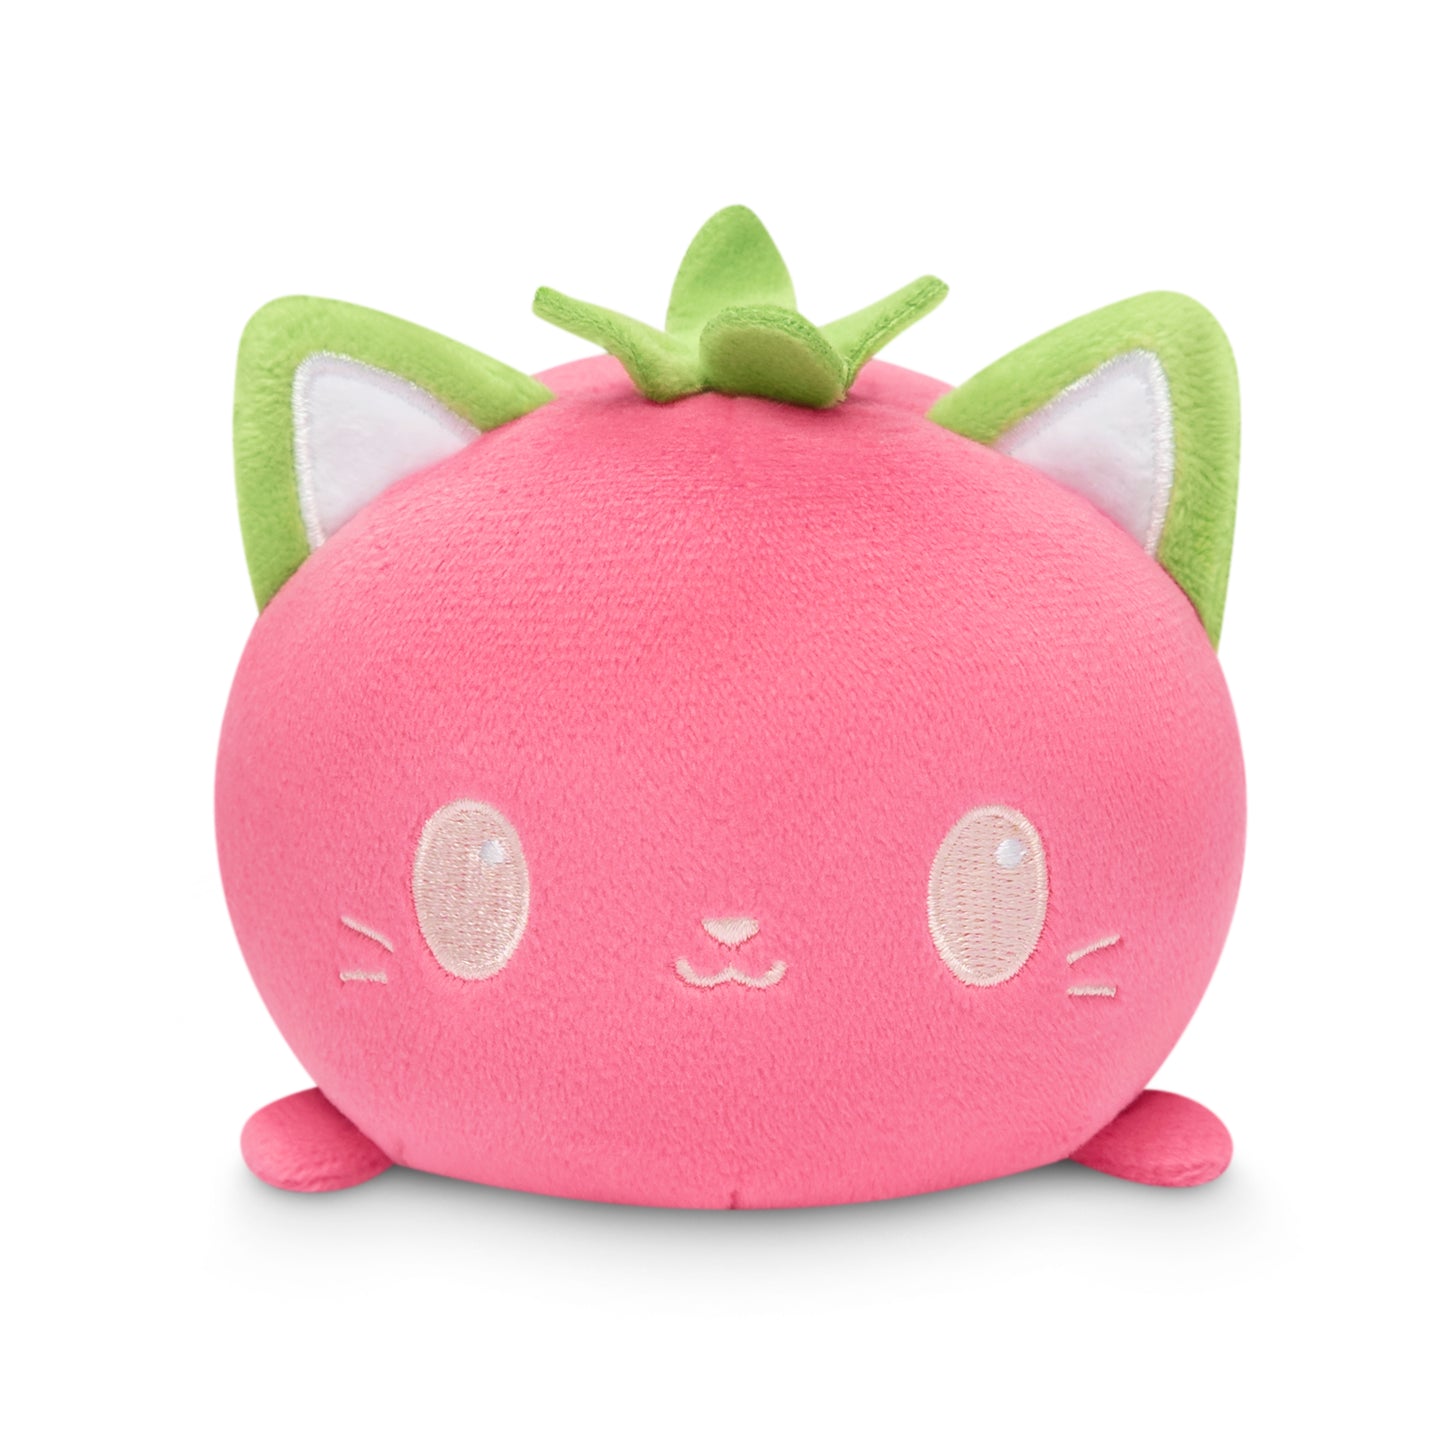 A Plushiverse Strawberry Cat Plushie Tote Bag by TeeTurtle, a pink cat shaped plush toy with green eyes, perfect as a plushie or for storage pouch.